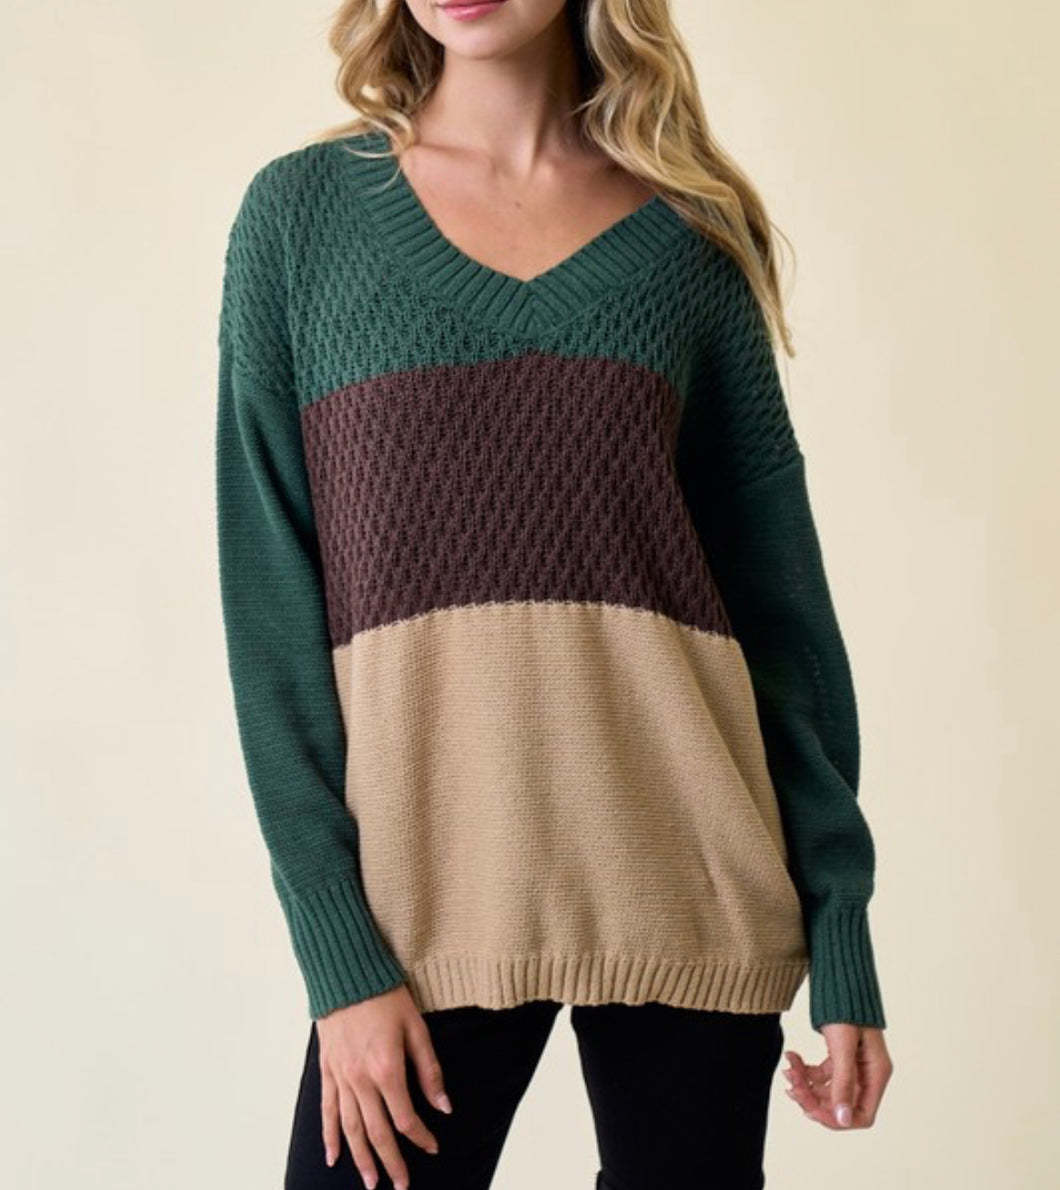 Emerald and Brown Color Block Sweater